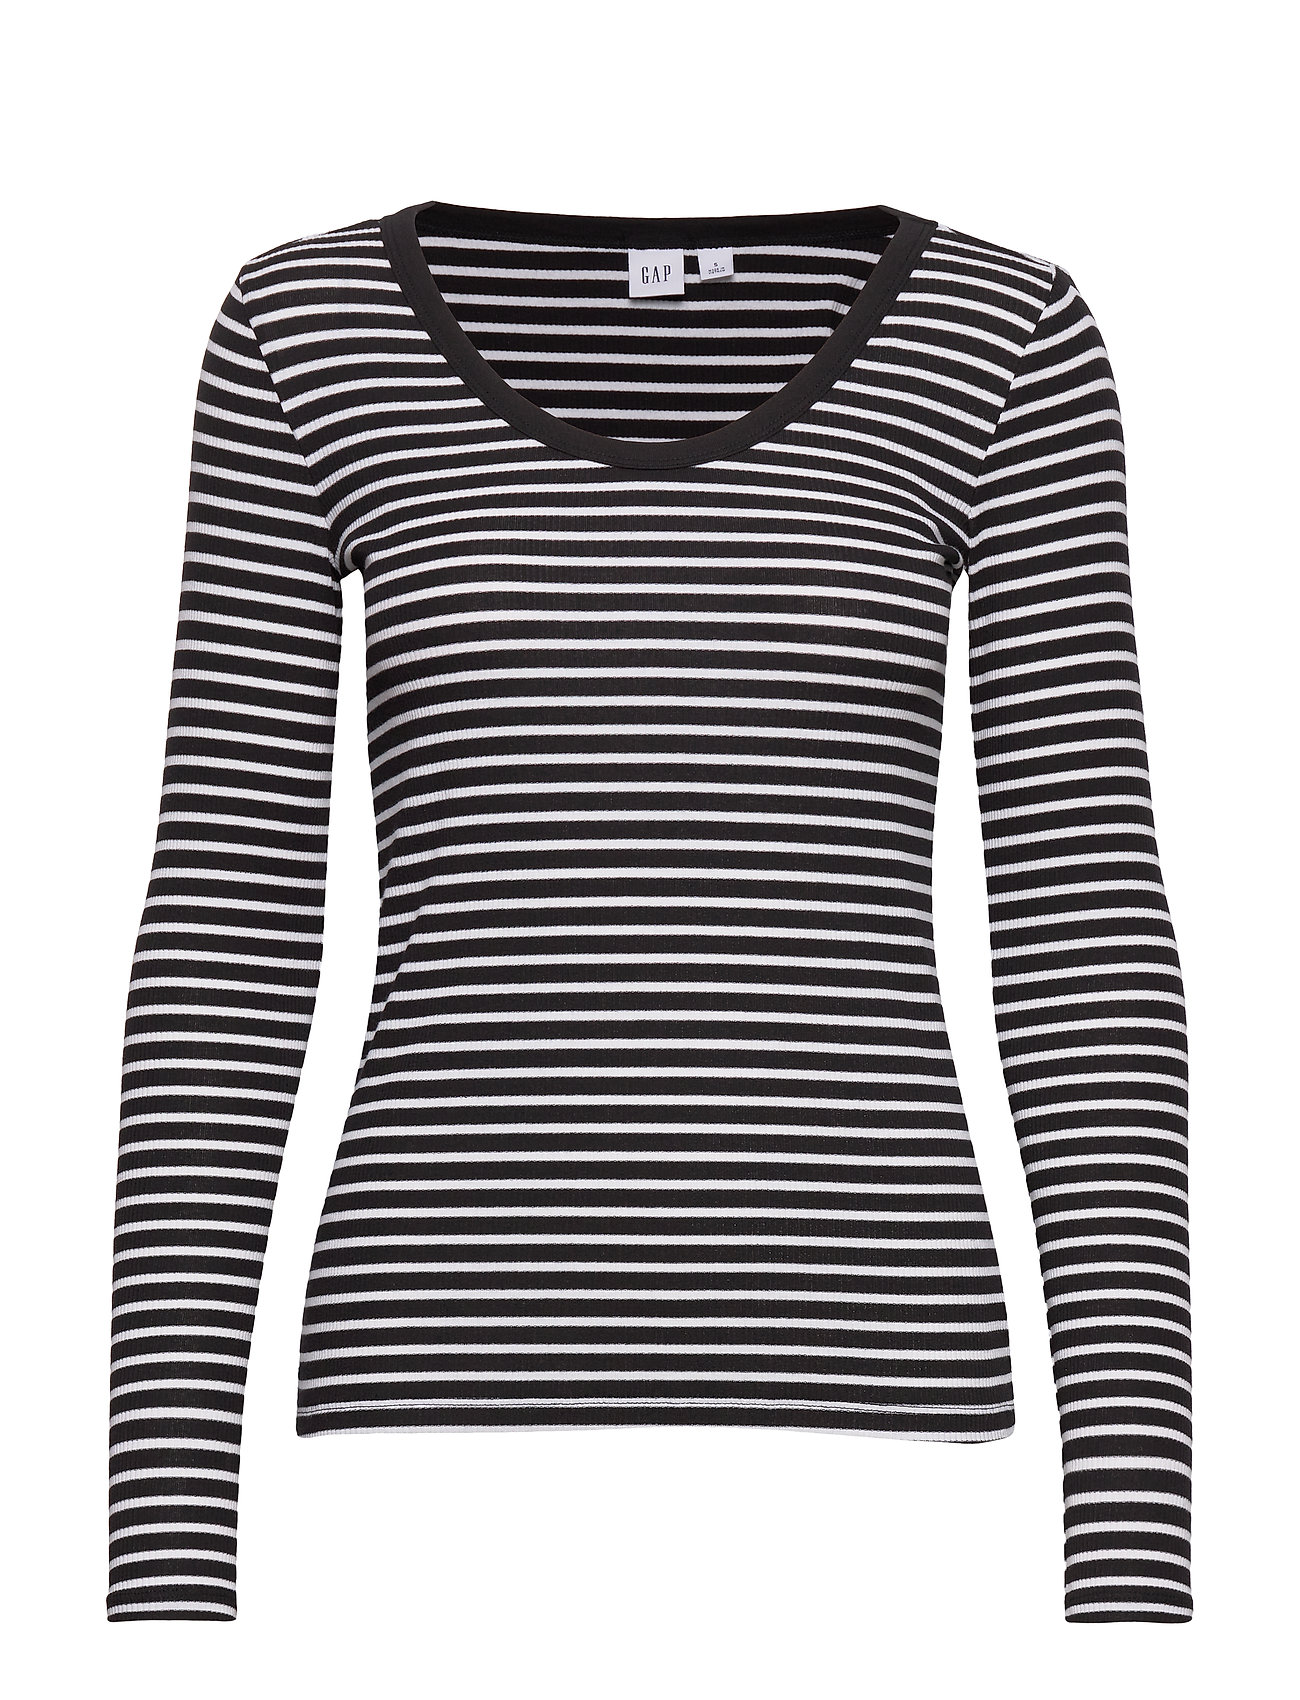 Gap Black And White Striped Shirt Deals, 59% OFF | www 